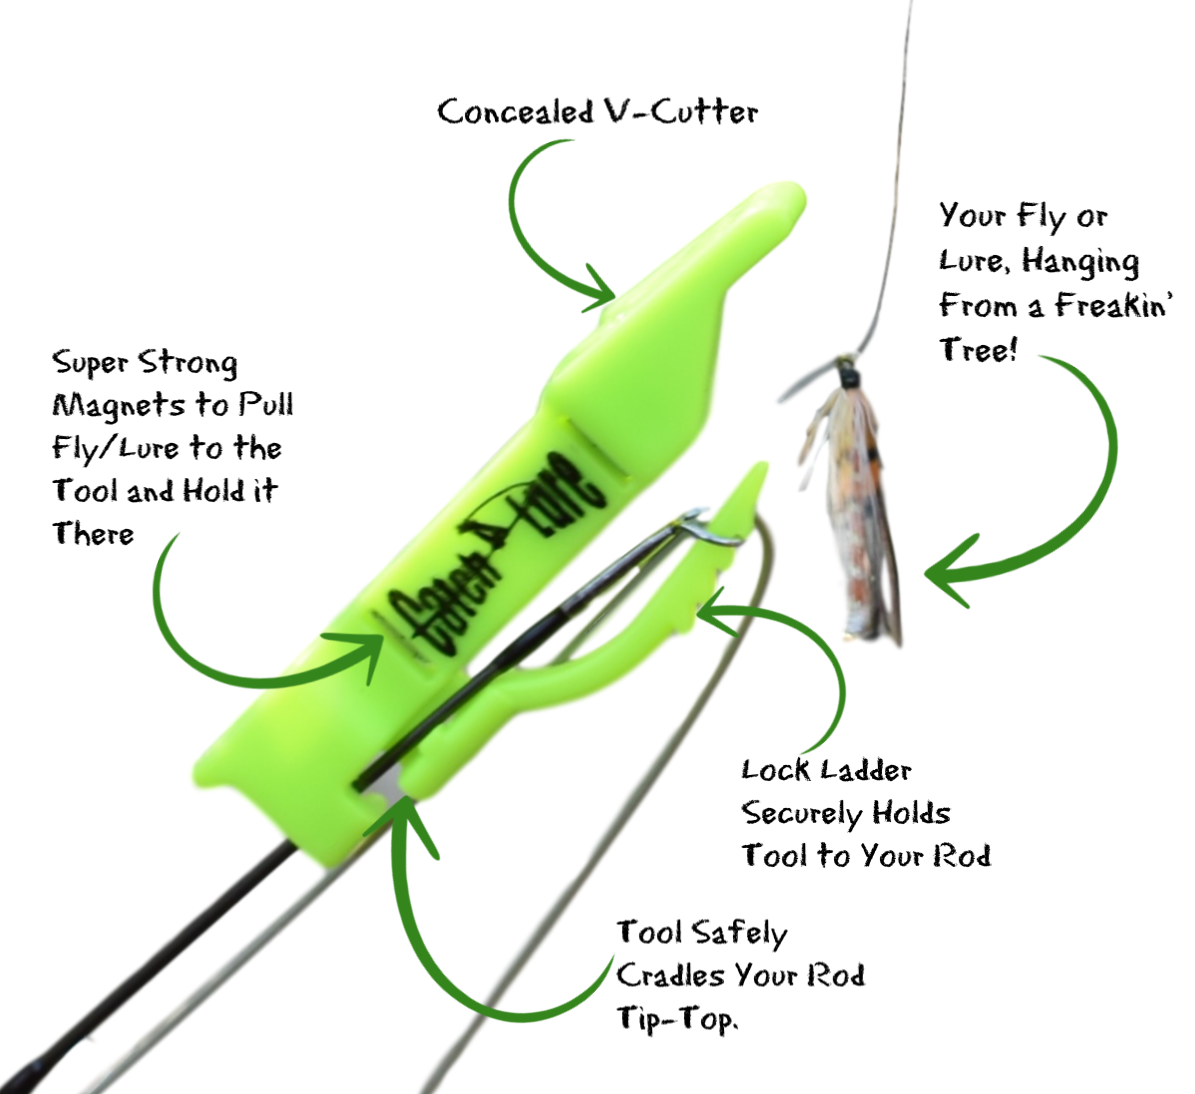 CatchALure lure retriever tool to get your snagged lures and hooks back!